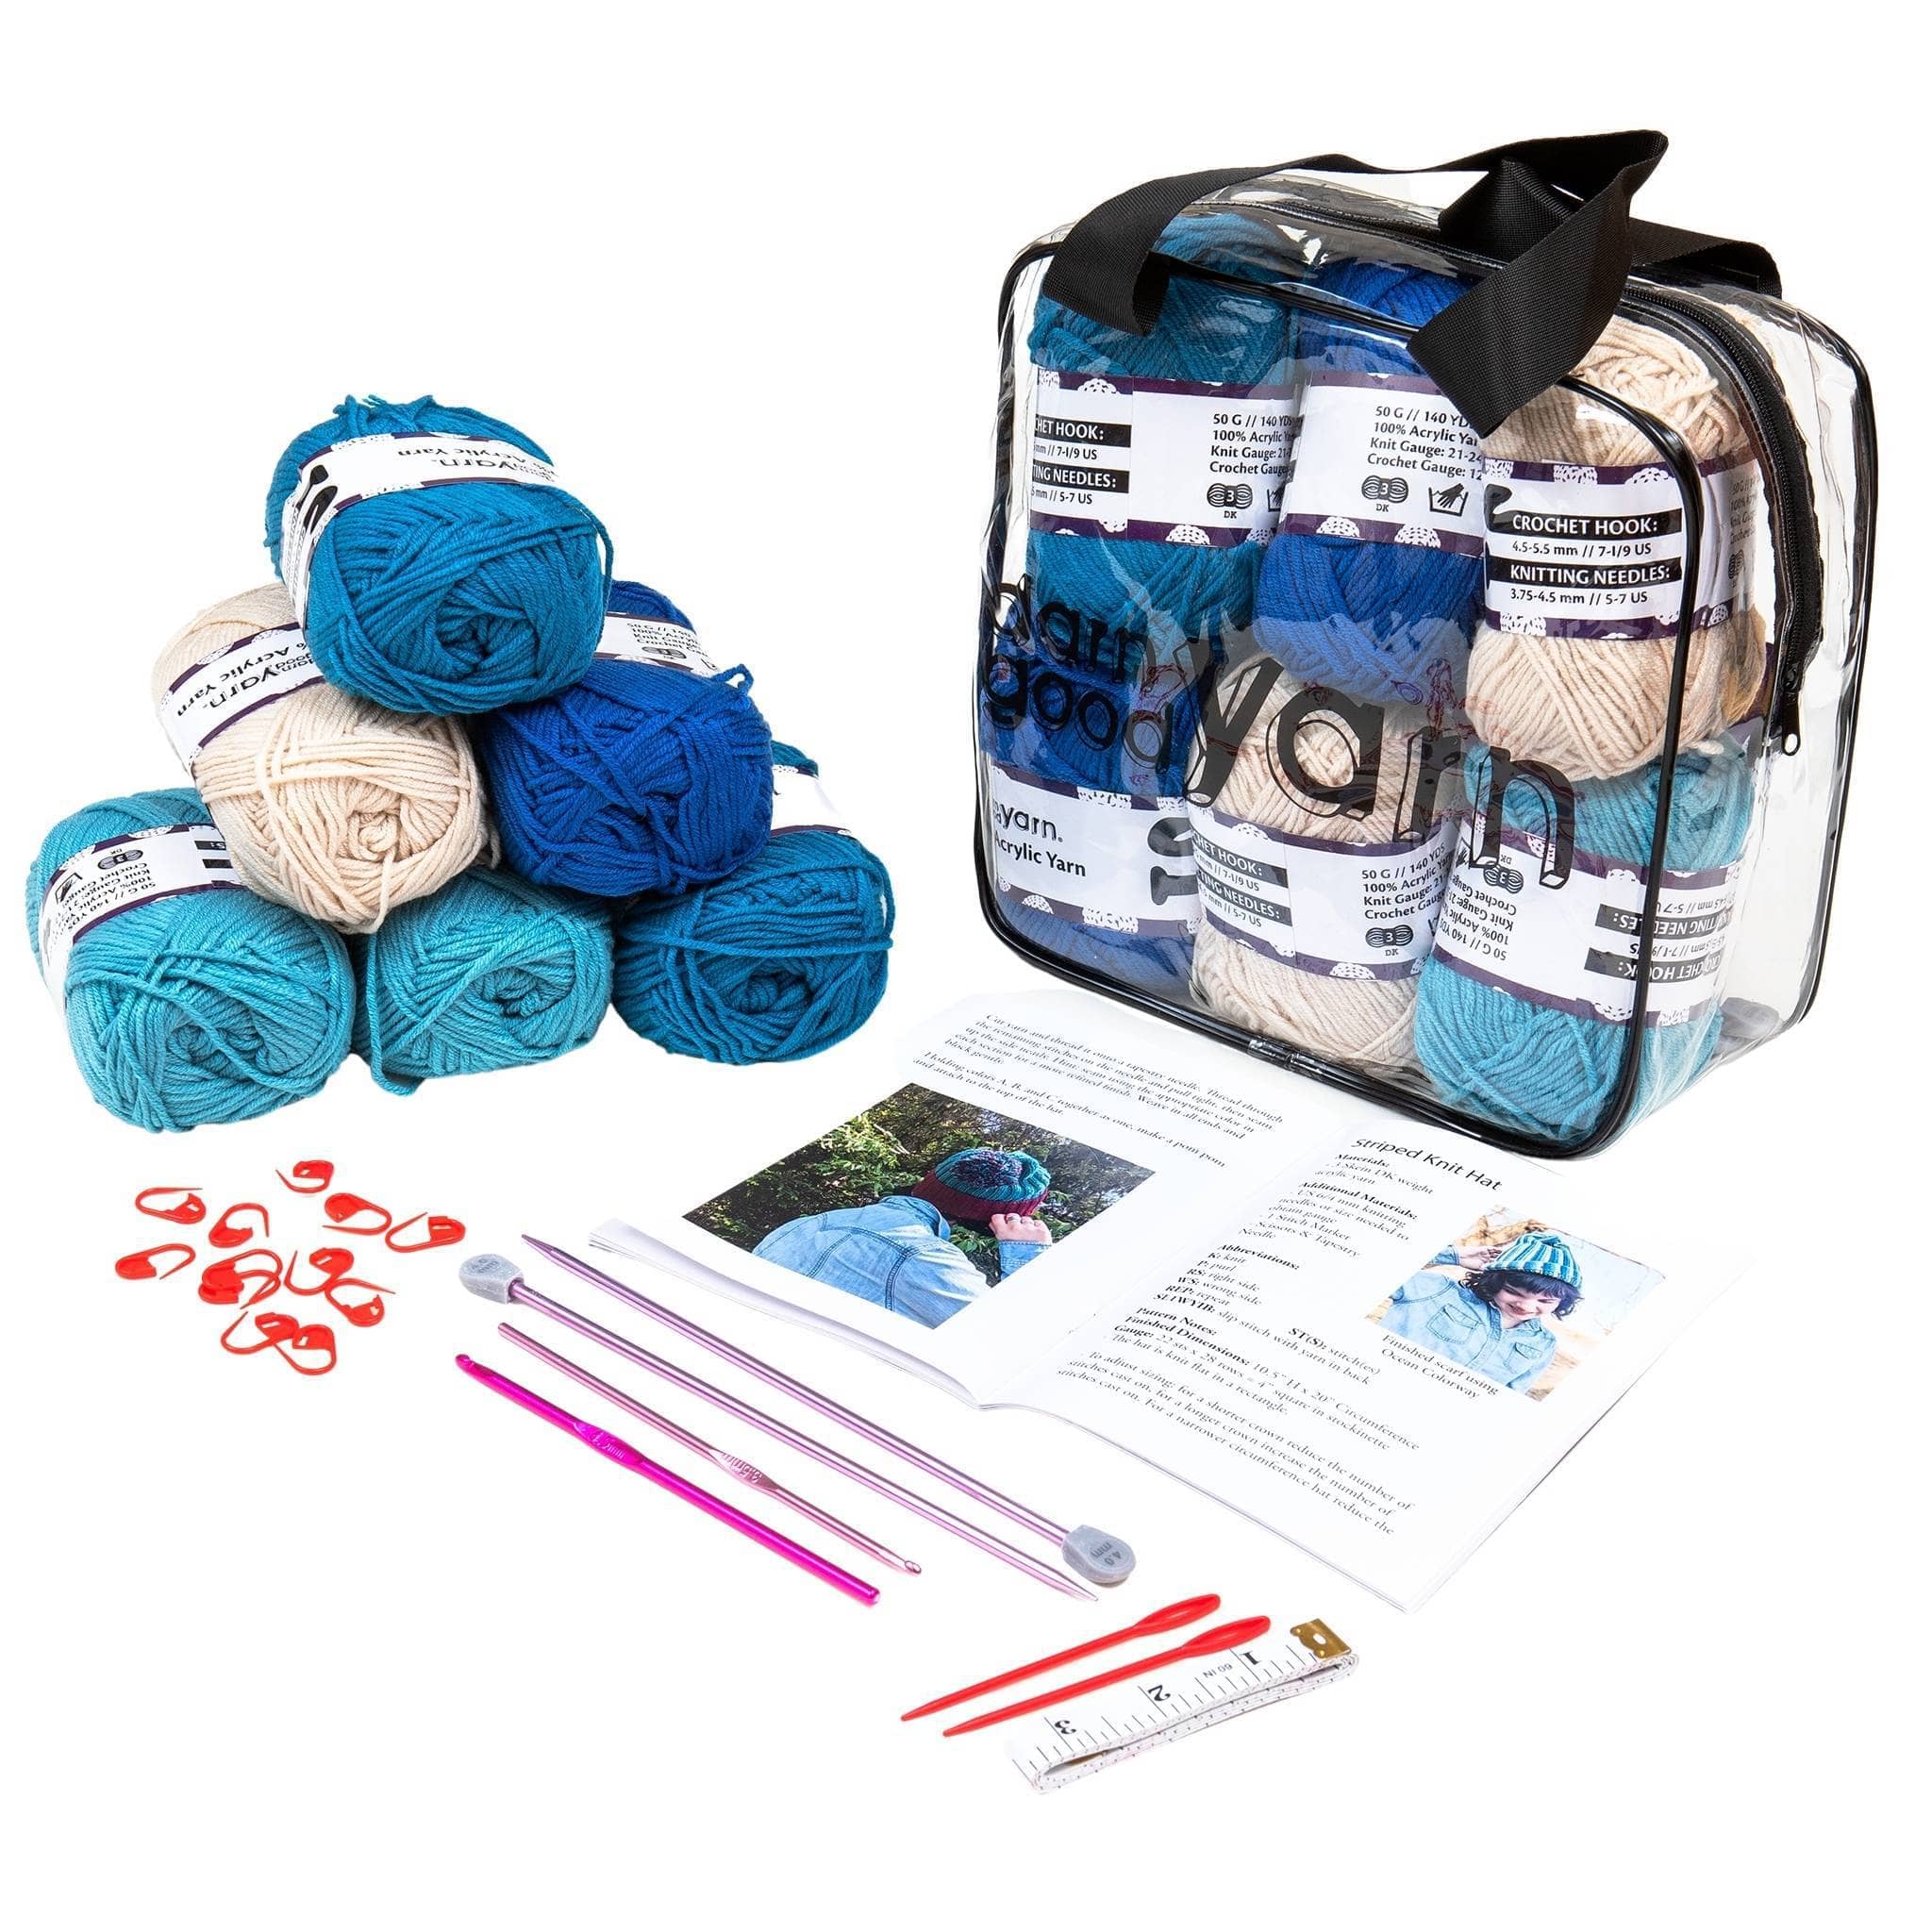 How to Knit or Crochet Kit - Beginner Crafting Kits